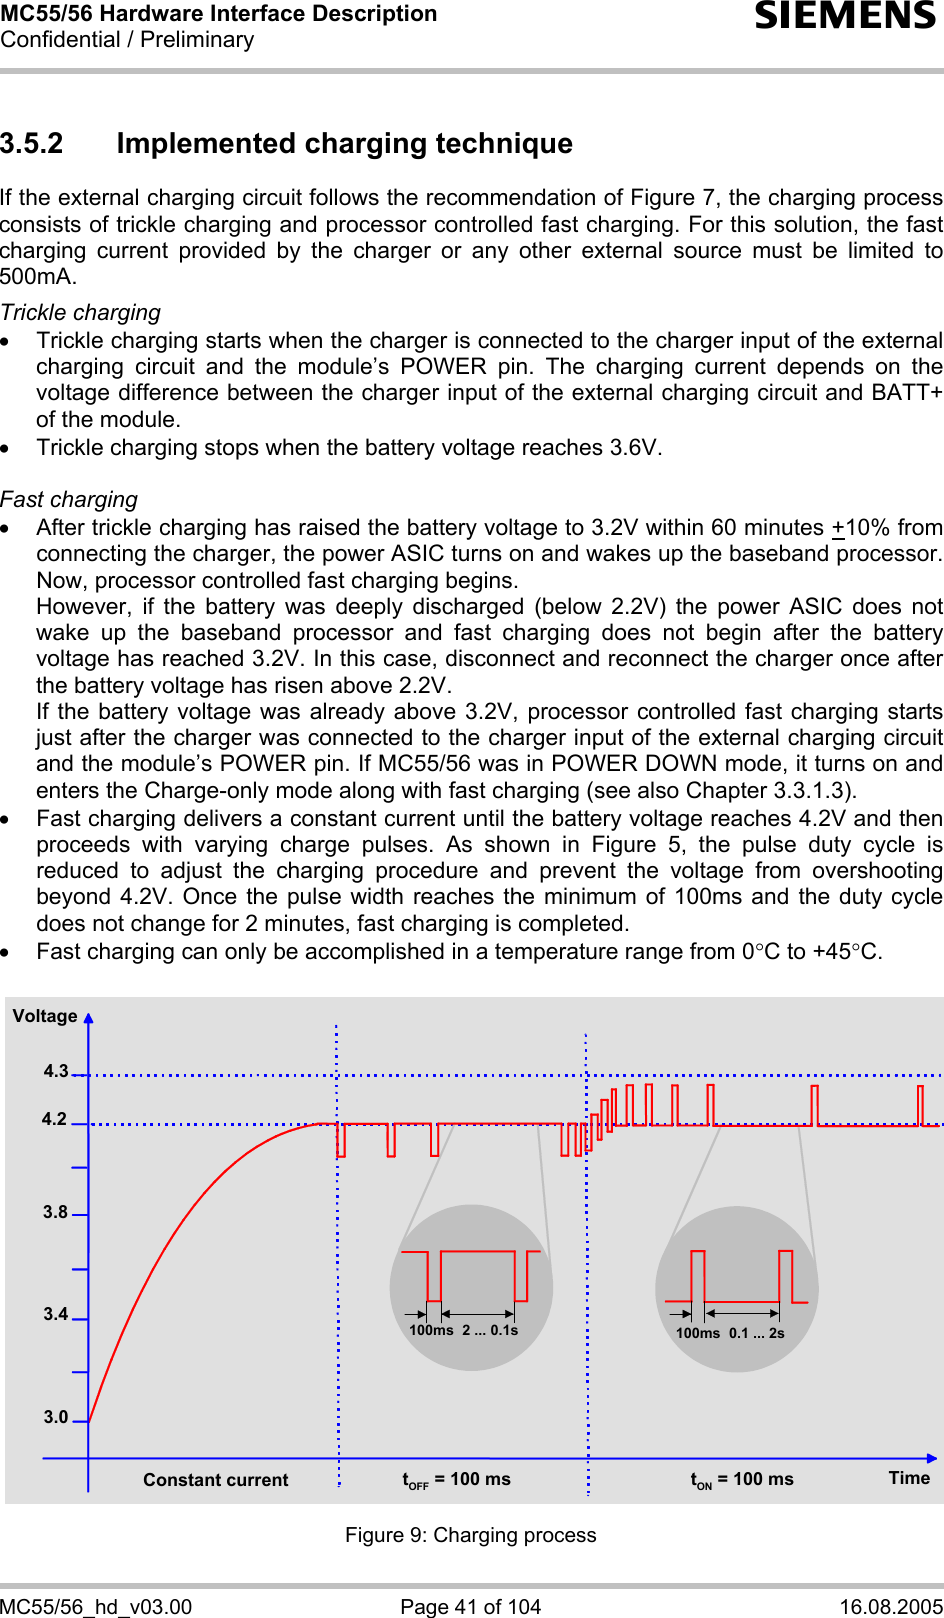 MC55/56 Hardware Interface Description Confidential / Preliminary s MC55/56_hd_v03.00  Page 41 of 104  16.08.2005 3.5.2  Implemented charging technique If the external charging circuit follows the recommendation of Figure 7, the charging process consists of trickle charging and processor controlled fast charging. For this solution, the fast charging current provided by the charger or any other external source must be limited to 500mA.   Trickle charging •  Trickle charging starts when the charger is connected to the charger input of the external charging circuit and the module’s POWER pin. The charging current depends on the voltage difference between the charger input of the external charging circuit and BATT+ of the module.  •  Trickle charging stops when the battery voltage reaches 3.6V.  Fast charging  •  After trickle charging has raised the battery voltage to 3.2V within 60 minutes +10% from connecting the charger, the power ASIC turns on and wakes up the baseband processor. Now, processor controlled fast charging begins.  However, if the battery was deeply discharged (below 2.2V) the power ASIC does not wake up the baseband processor and fast charging does not begin after the battery voltage has reached 3.2V. In this case, disconnect and reconnect the charger once after the battery voltage has risen above 2.2V. If the battery voltage was already above 3.2V, processor controlled fast charging starts just after the charger was connected to the charger input of the external charging circuit and the module’s POWER pin. If MC55/56 was in POWER DOWN mode, it turns on and enters the Charge-only mode along with fast charging (see also Chapter 3.3.1.3). •  Fast charging delivers a constant current until the battery voltage reaches 4.2V and then proceeds with varying charge pulses. As shown in Figure 5, the pulse duty cycle is reduced to adjust the charging procedure and prevent the voltage from overshooting beyond 4.2V. Once the pulse width reaches the minimum of 100ms and the duty cycle does not change for 2 minutes, fast charging is completed. •  Fast charging can only be accomplished in a temperature range from 0°C to +45°C.  4.34.23.8Voltage3.43.0Constant current tOFF = 100 ms tON = 100 ms Time100ms 2 ... 0.1s 100ms 0.1 ... 2s  Figure 9: Charging process 